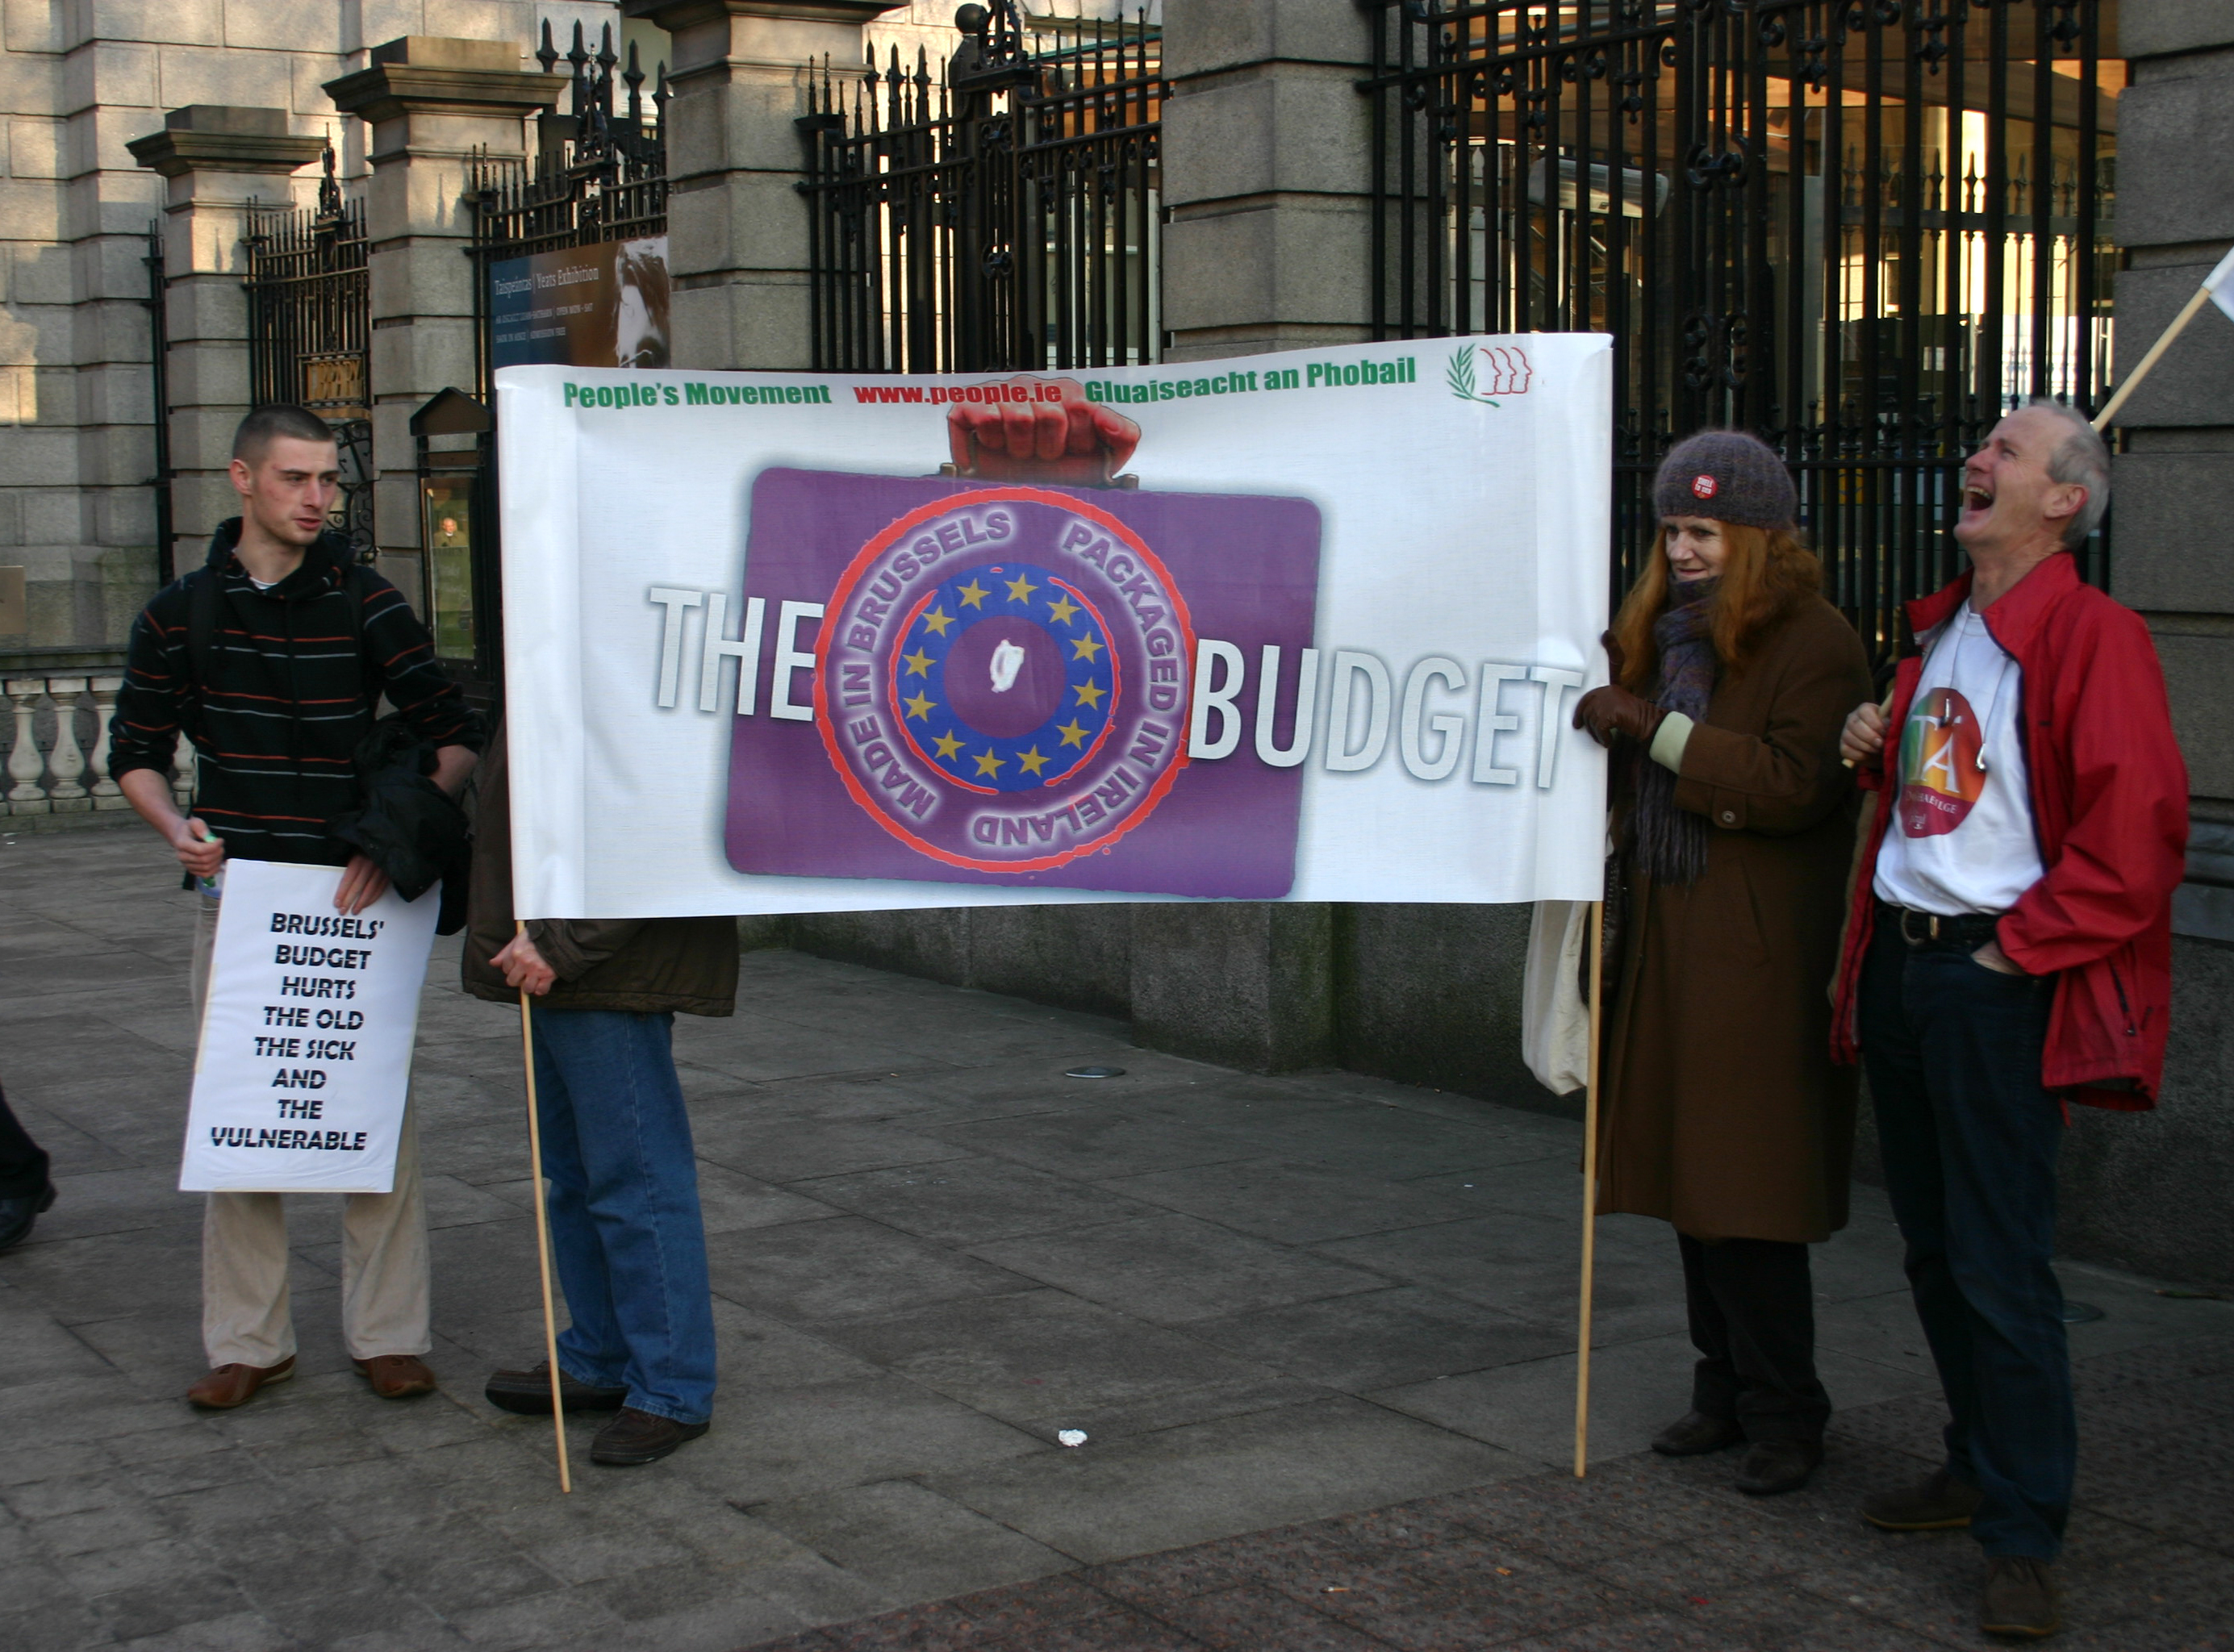 Protesting against austerity policy in Dublin